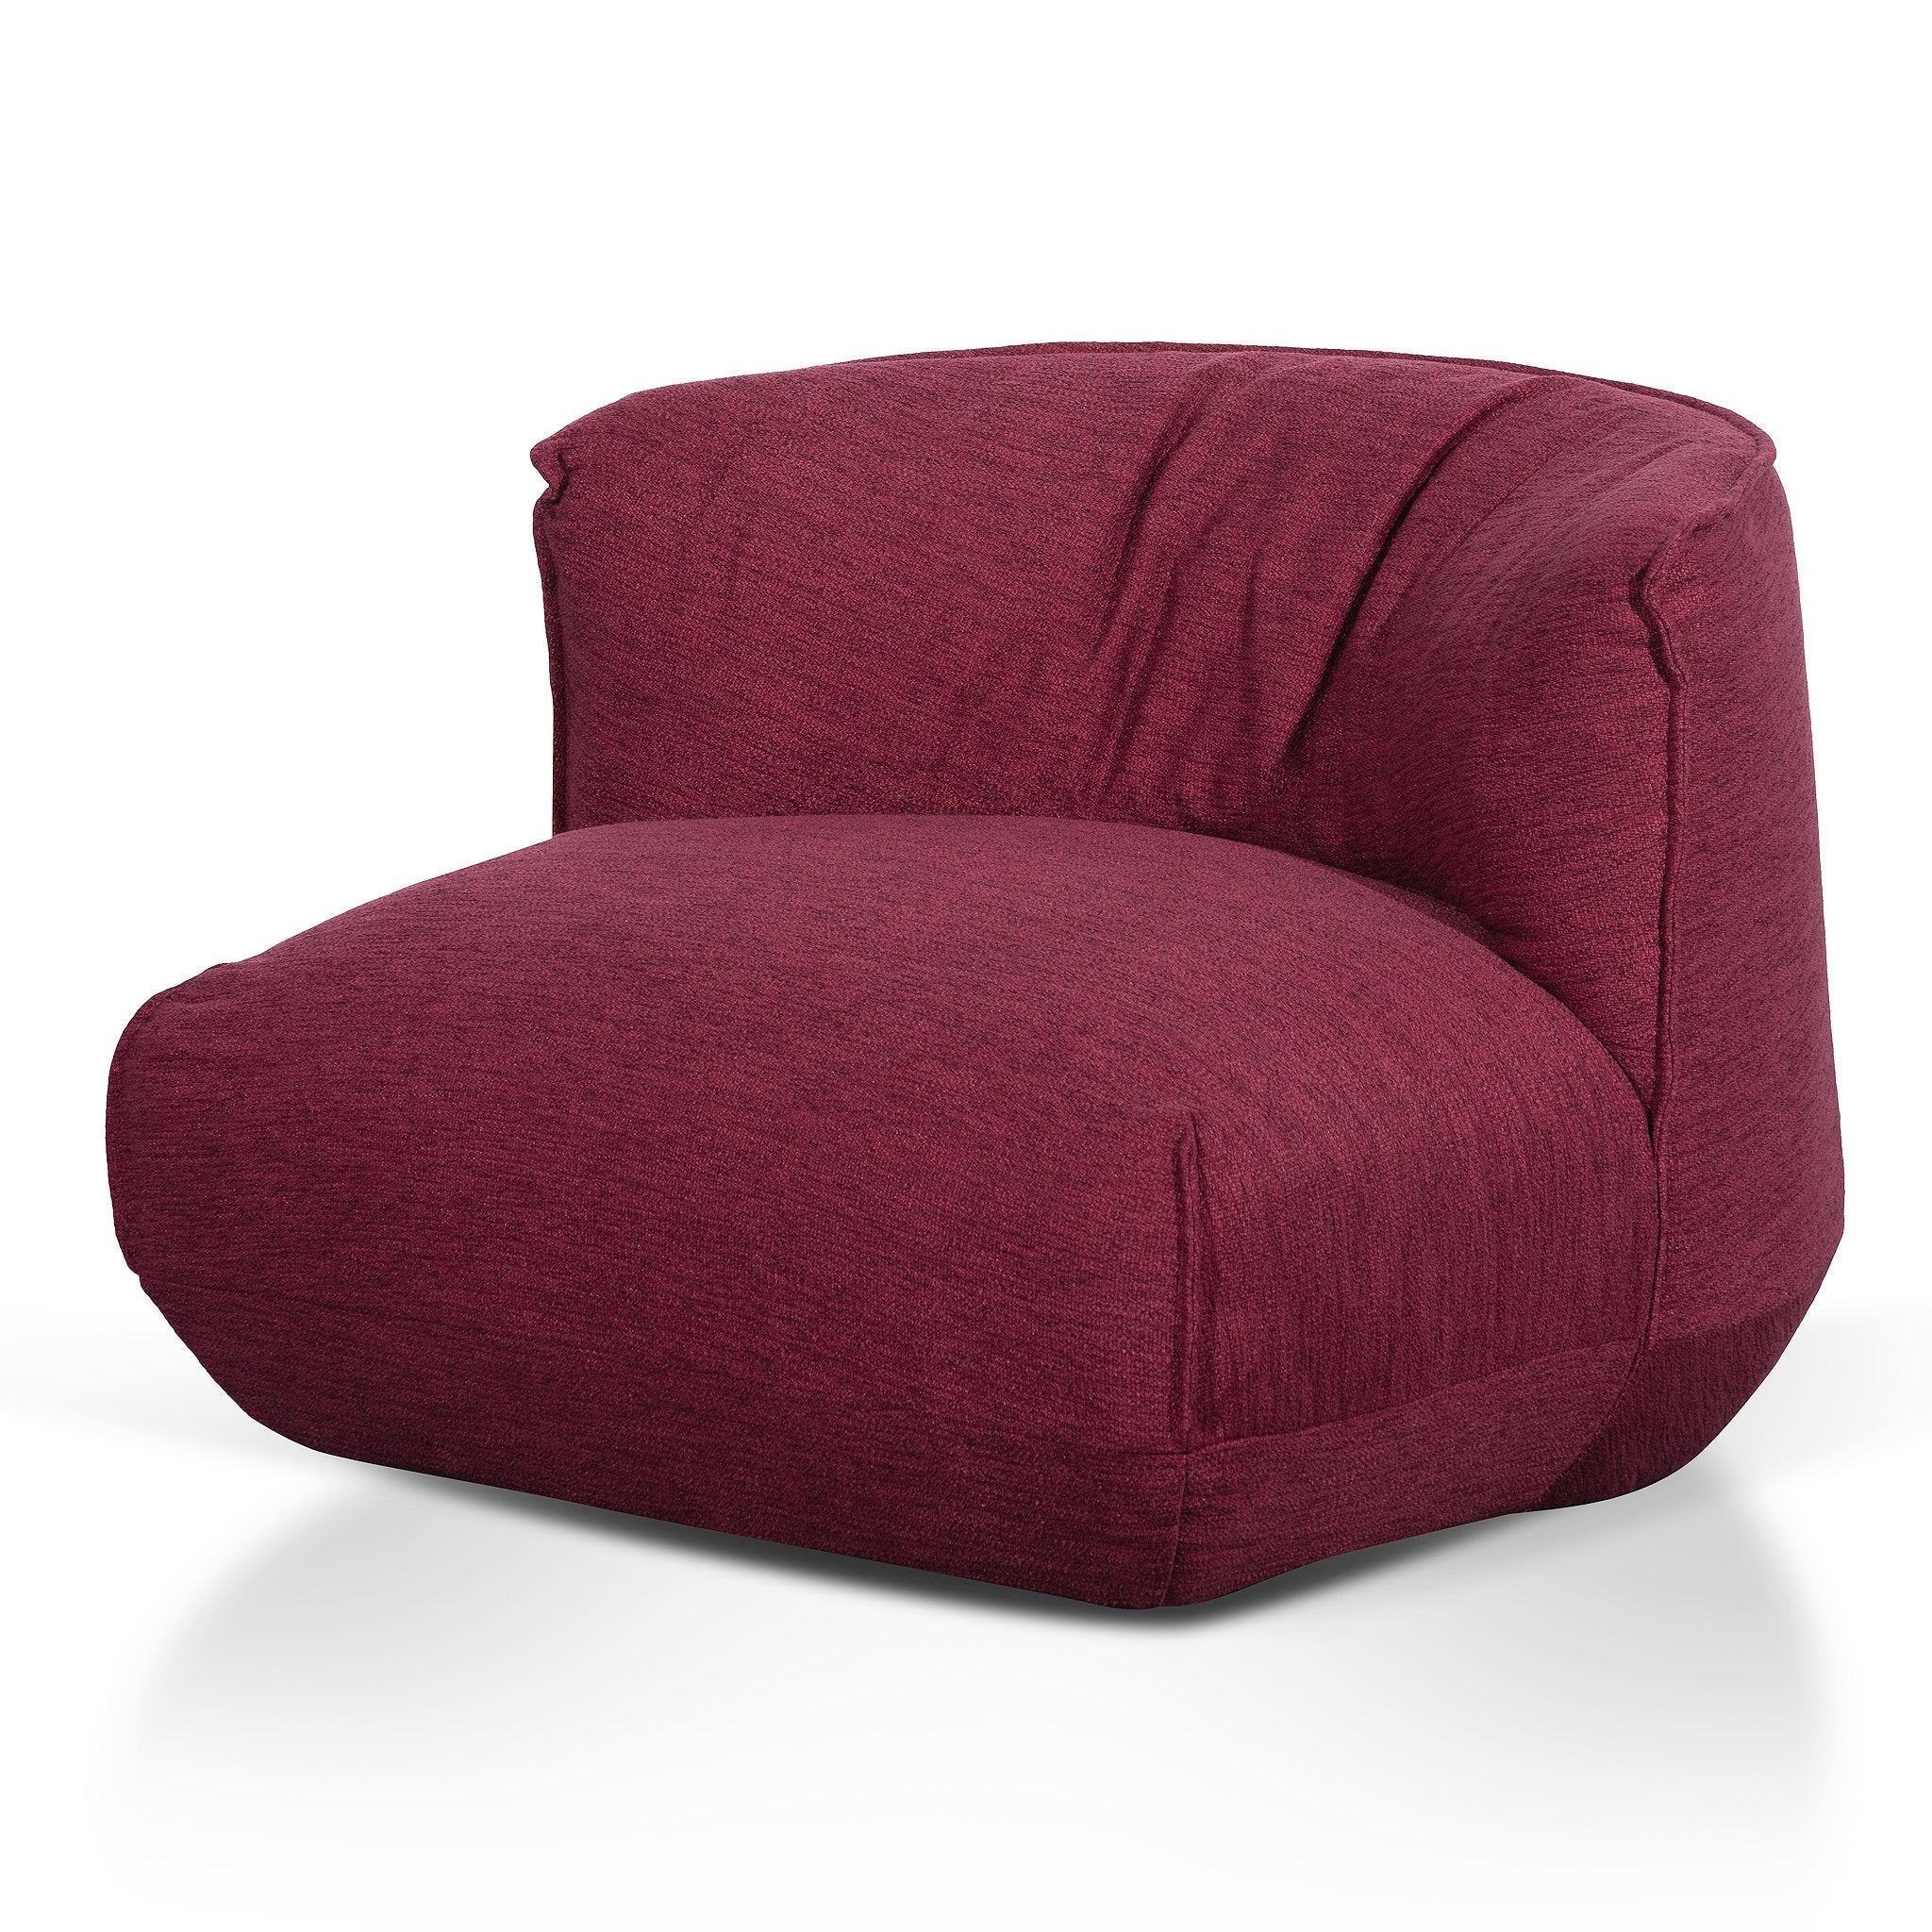 Everly Fabric Lounge Chair - Garnet Red